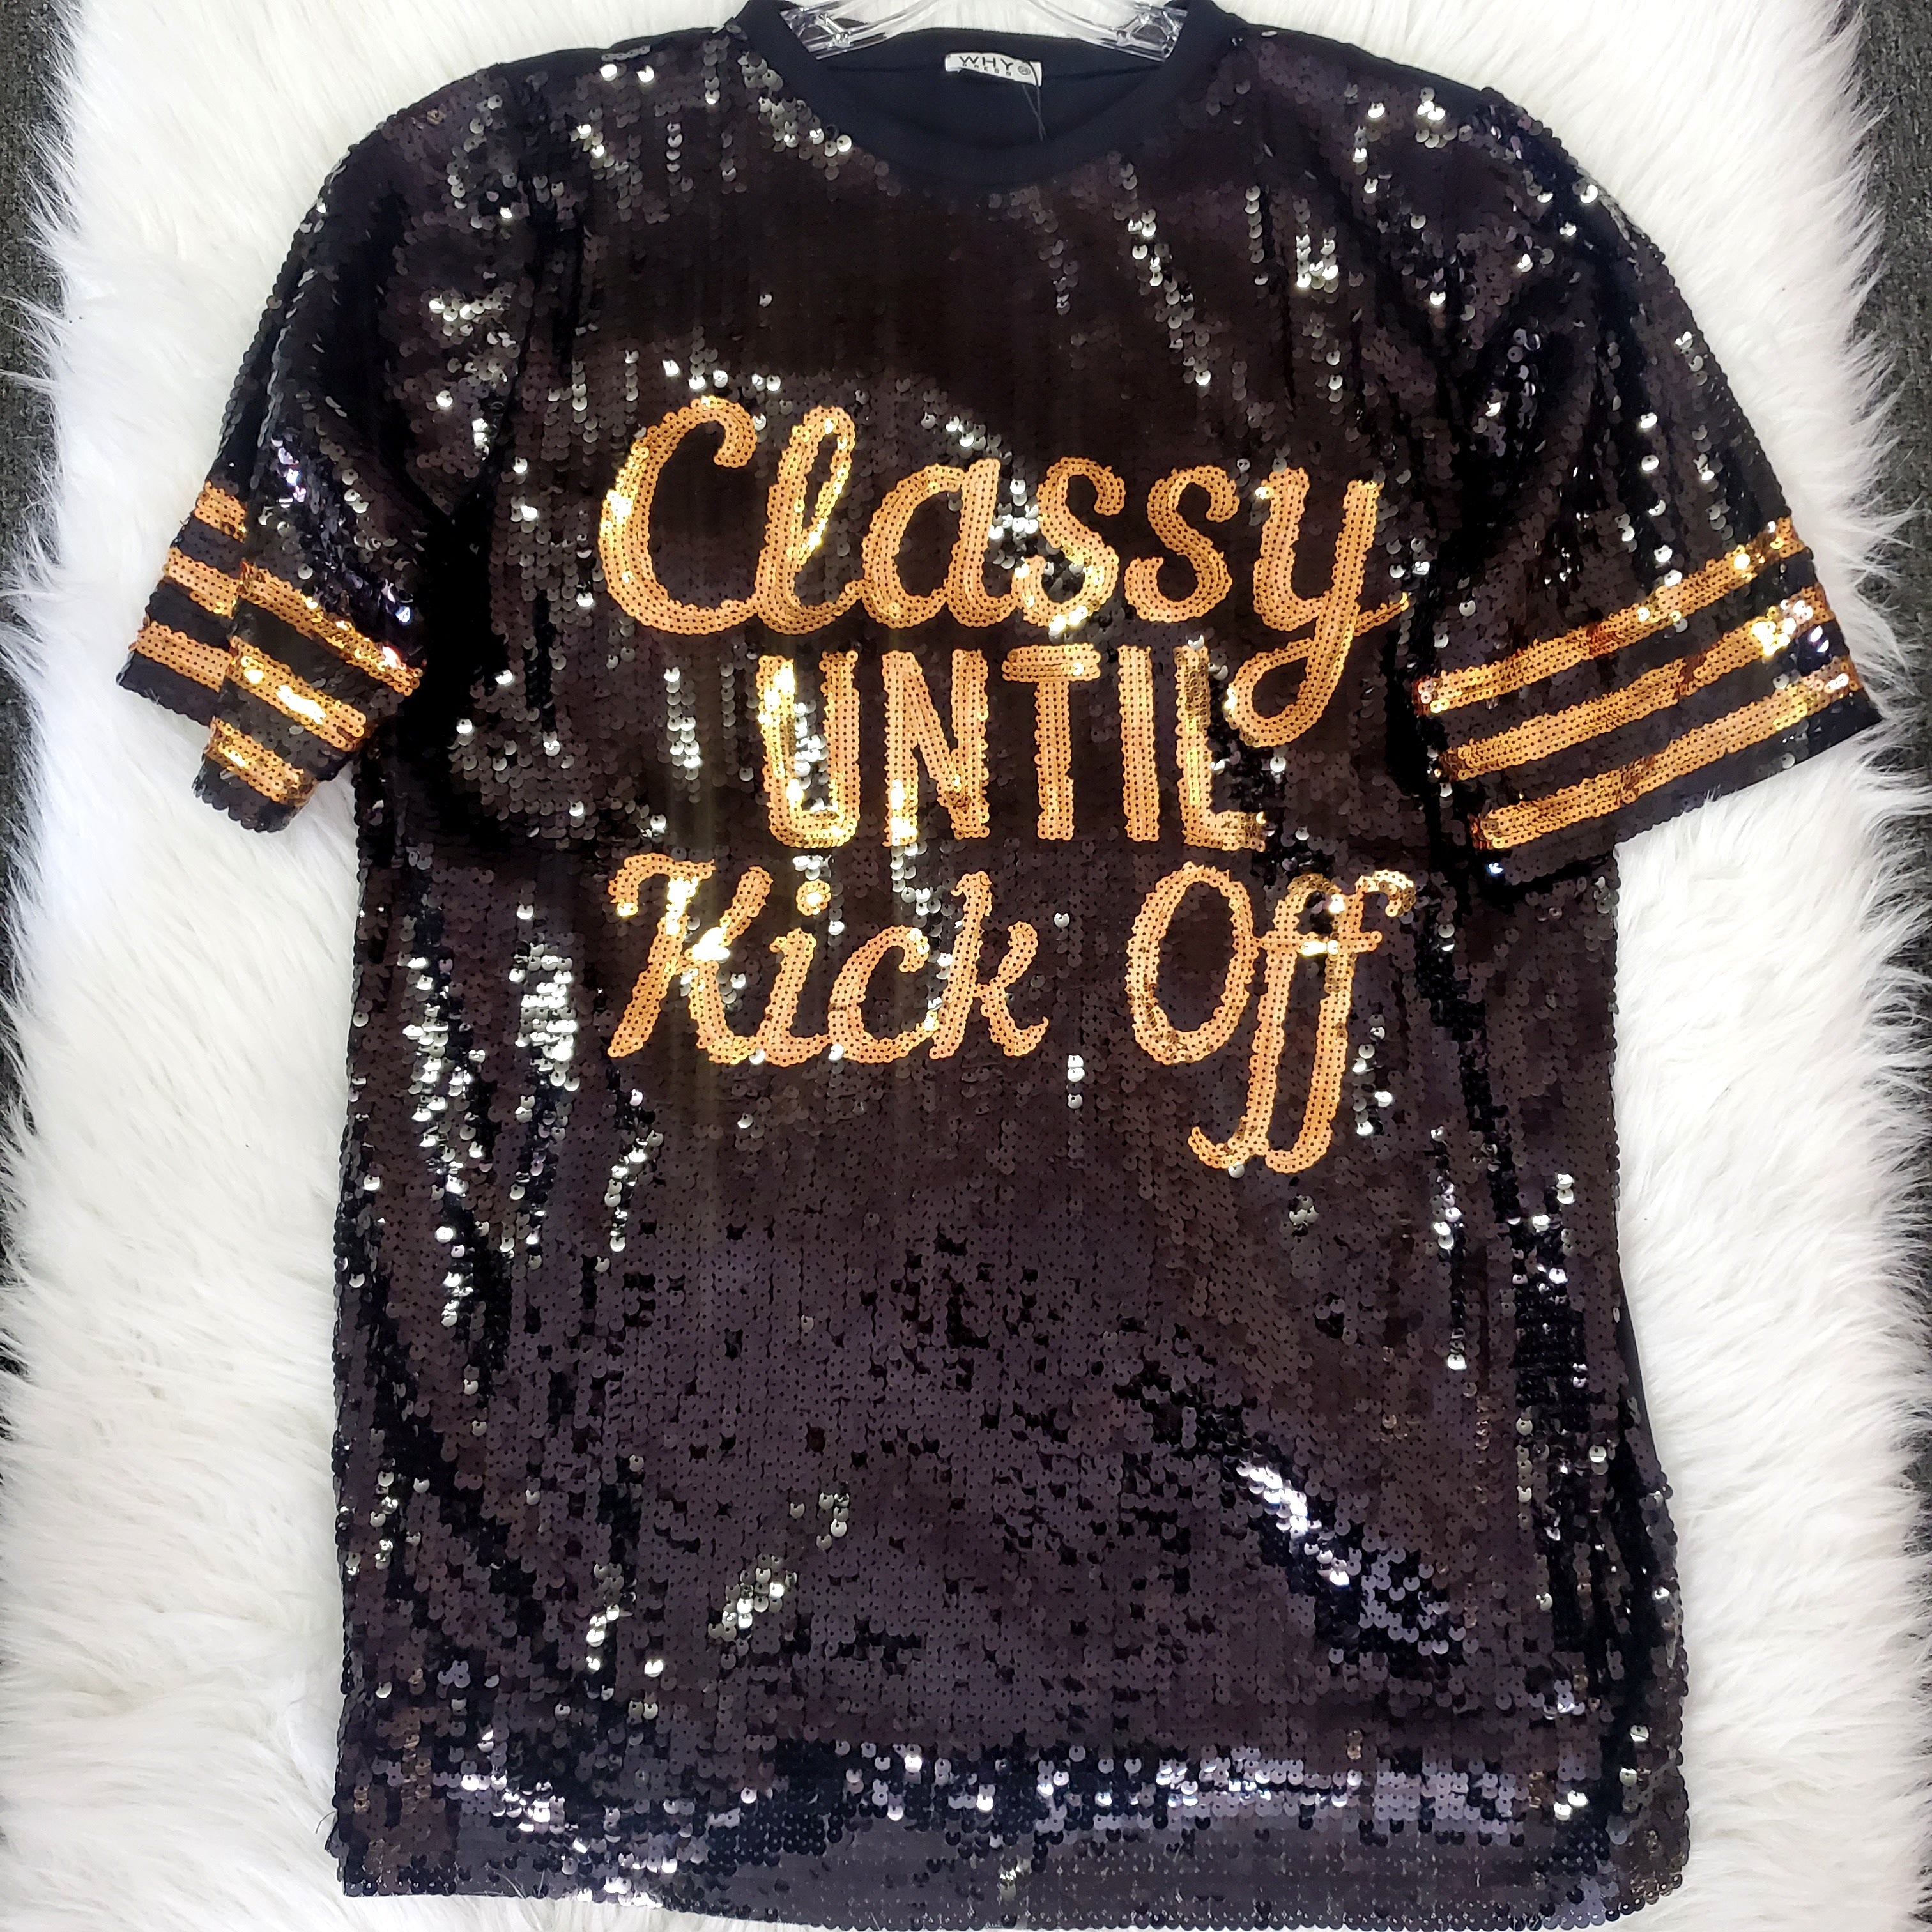 *restocks soon * Black n gold sequin dress Classy Until Kickoff (sequin front only)